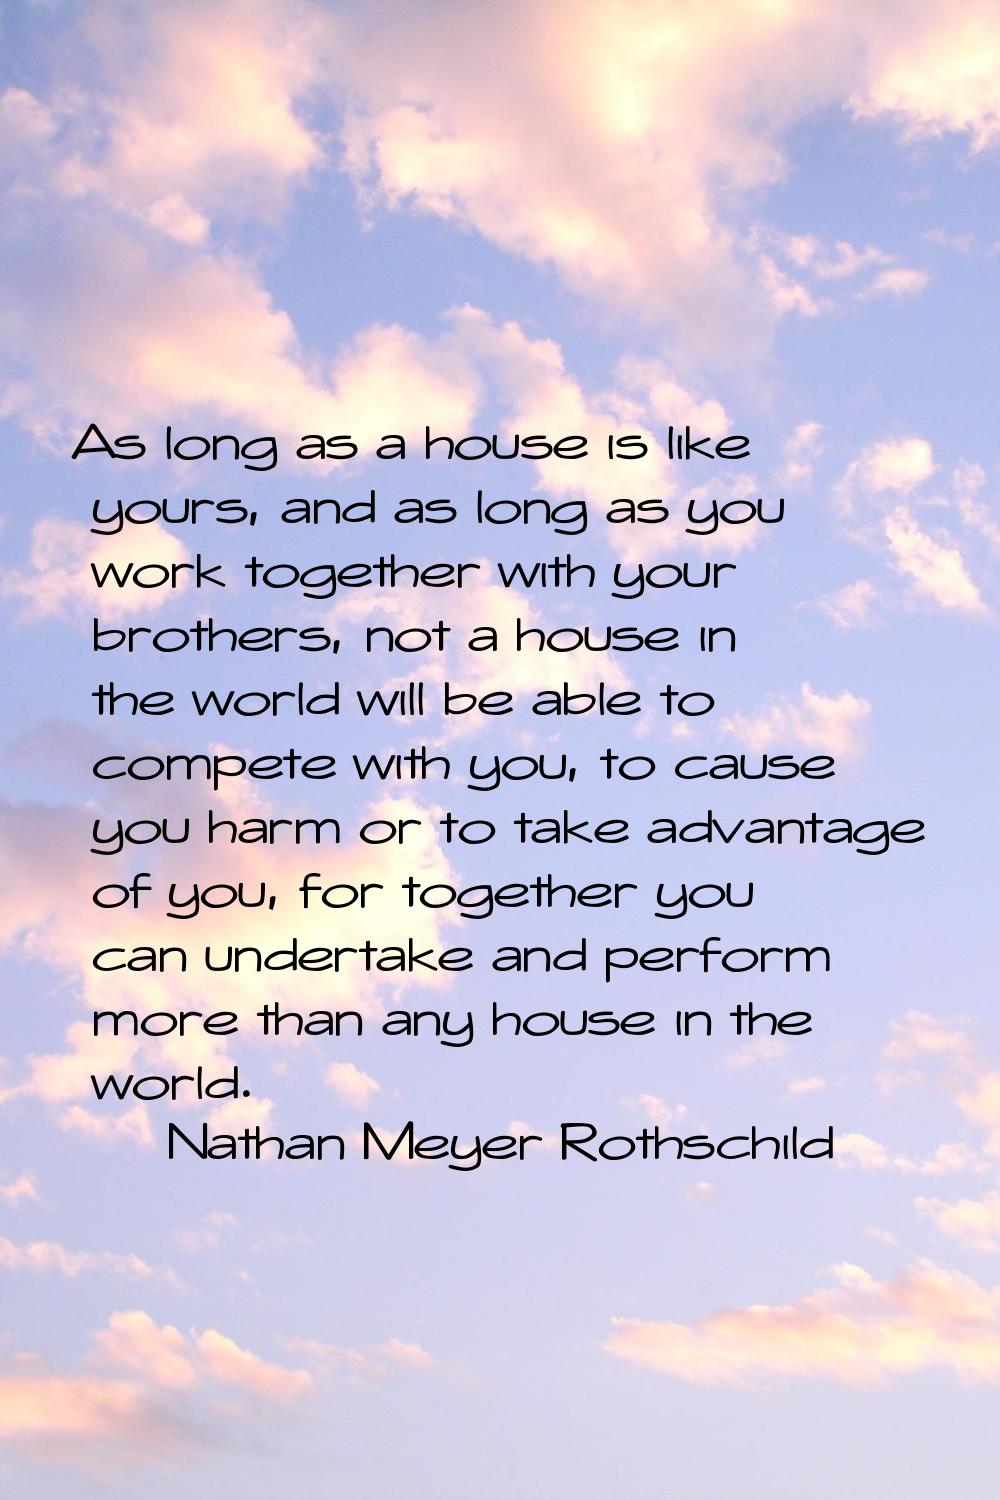 As long as a house is like yours, and as long as you work together with your brothers, not a house 